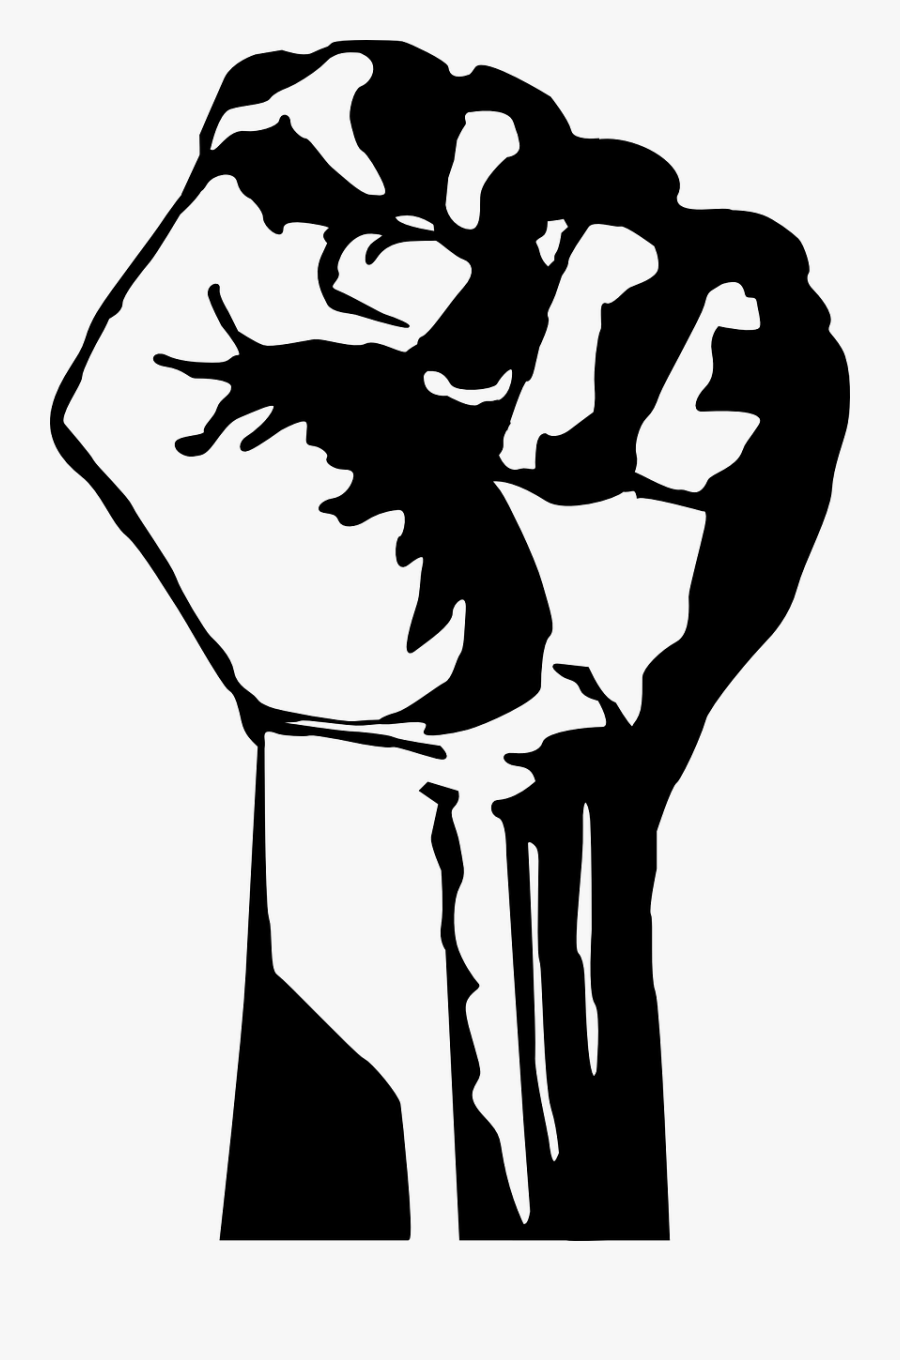 United Openalpr Business Youtube States Fist Clipart - Fist In The Air, Transparent Clipart